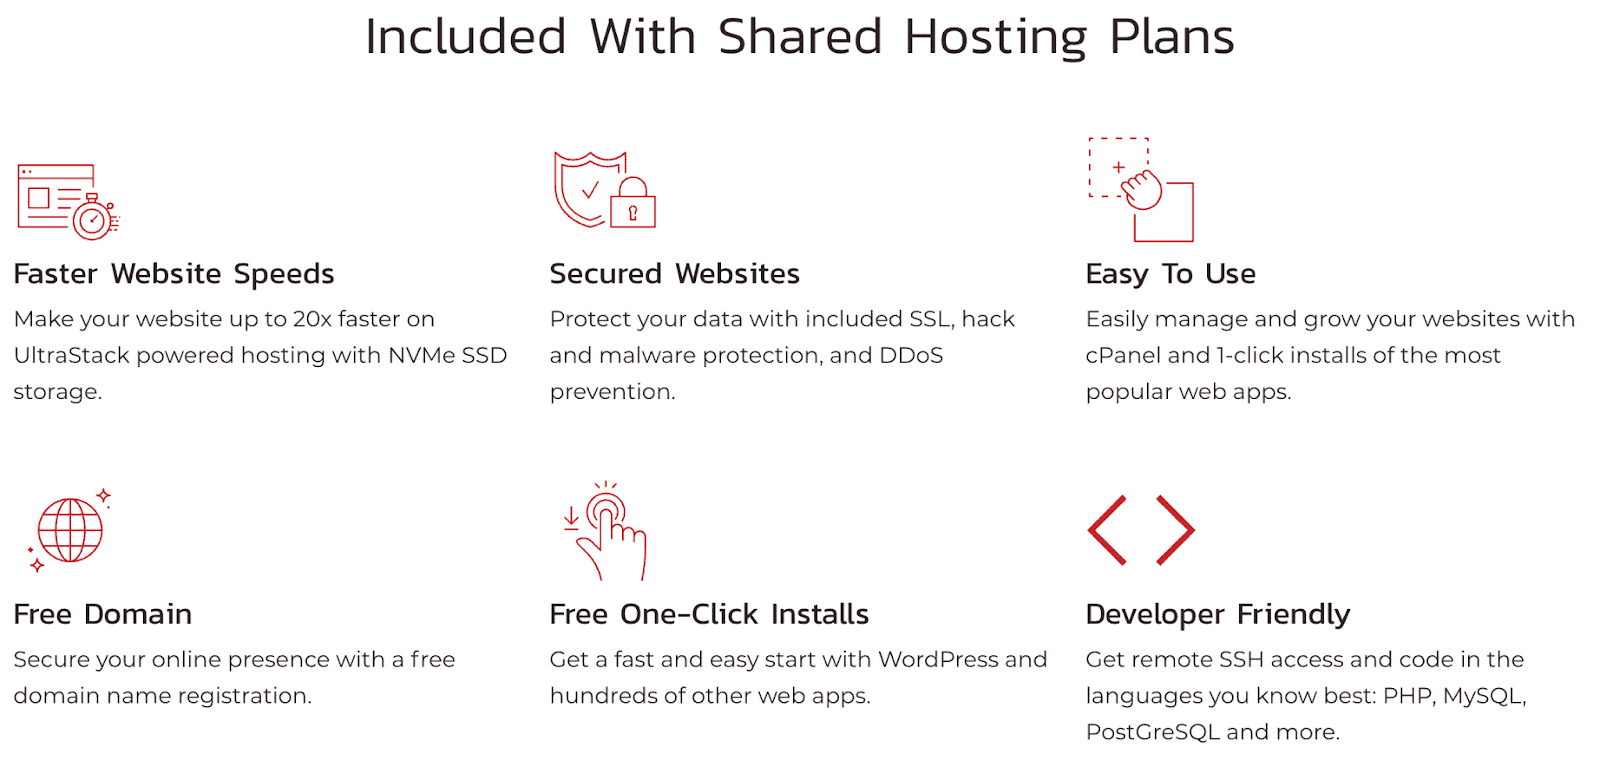 inmotion hosting, included with shared hosting plans